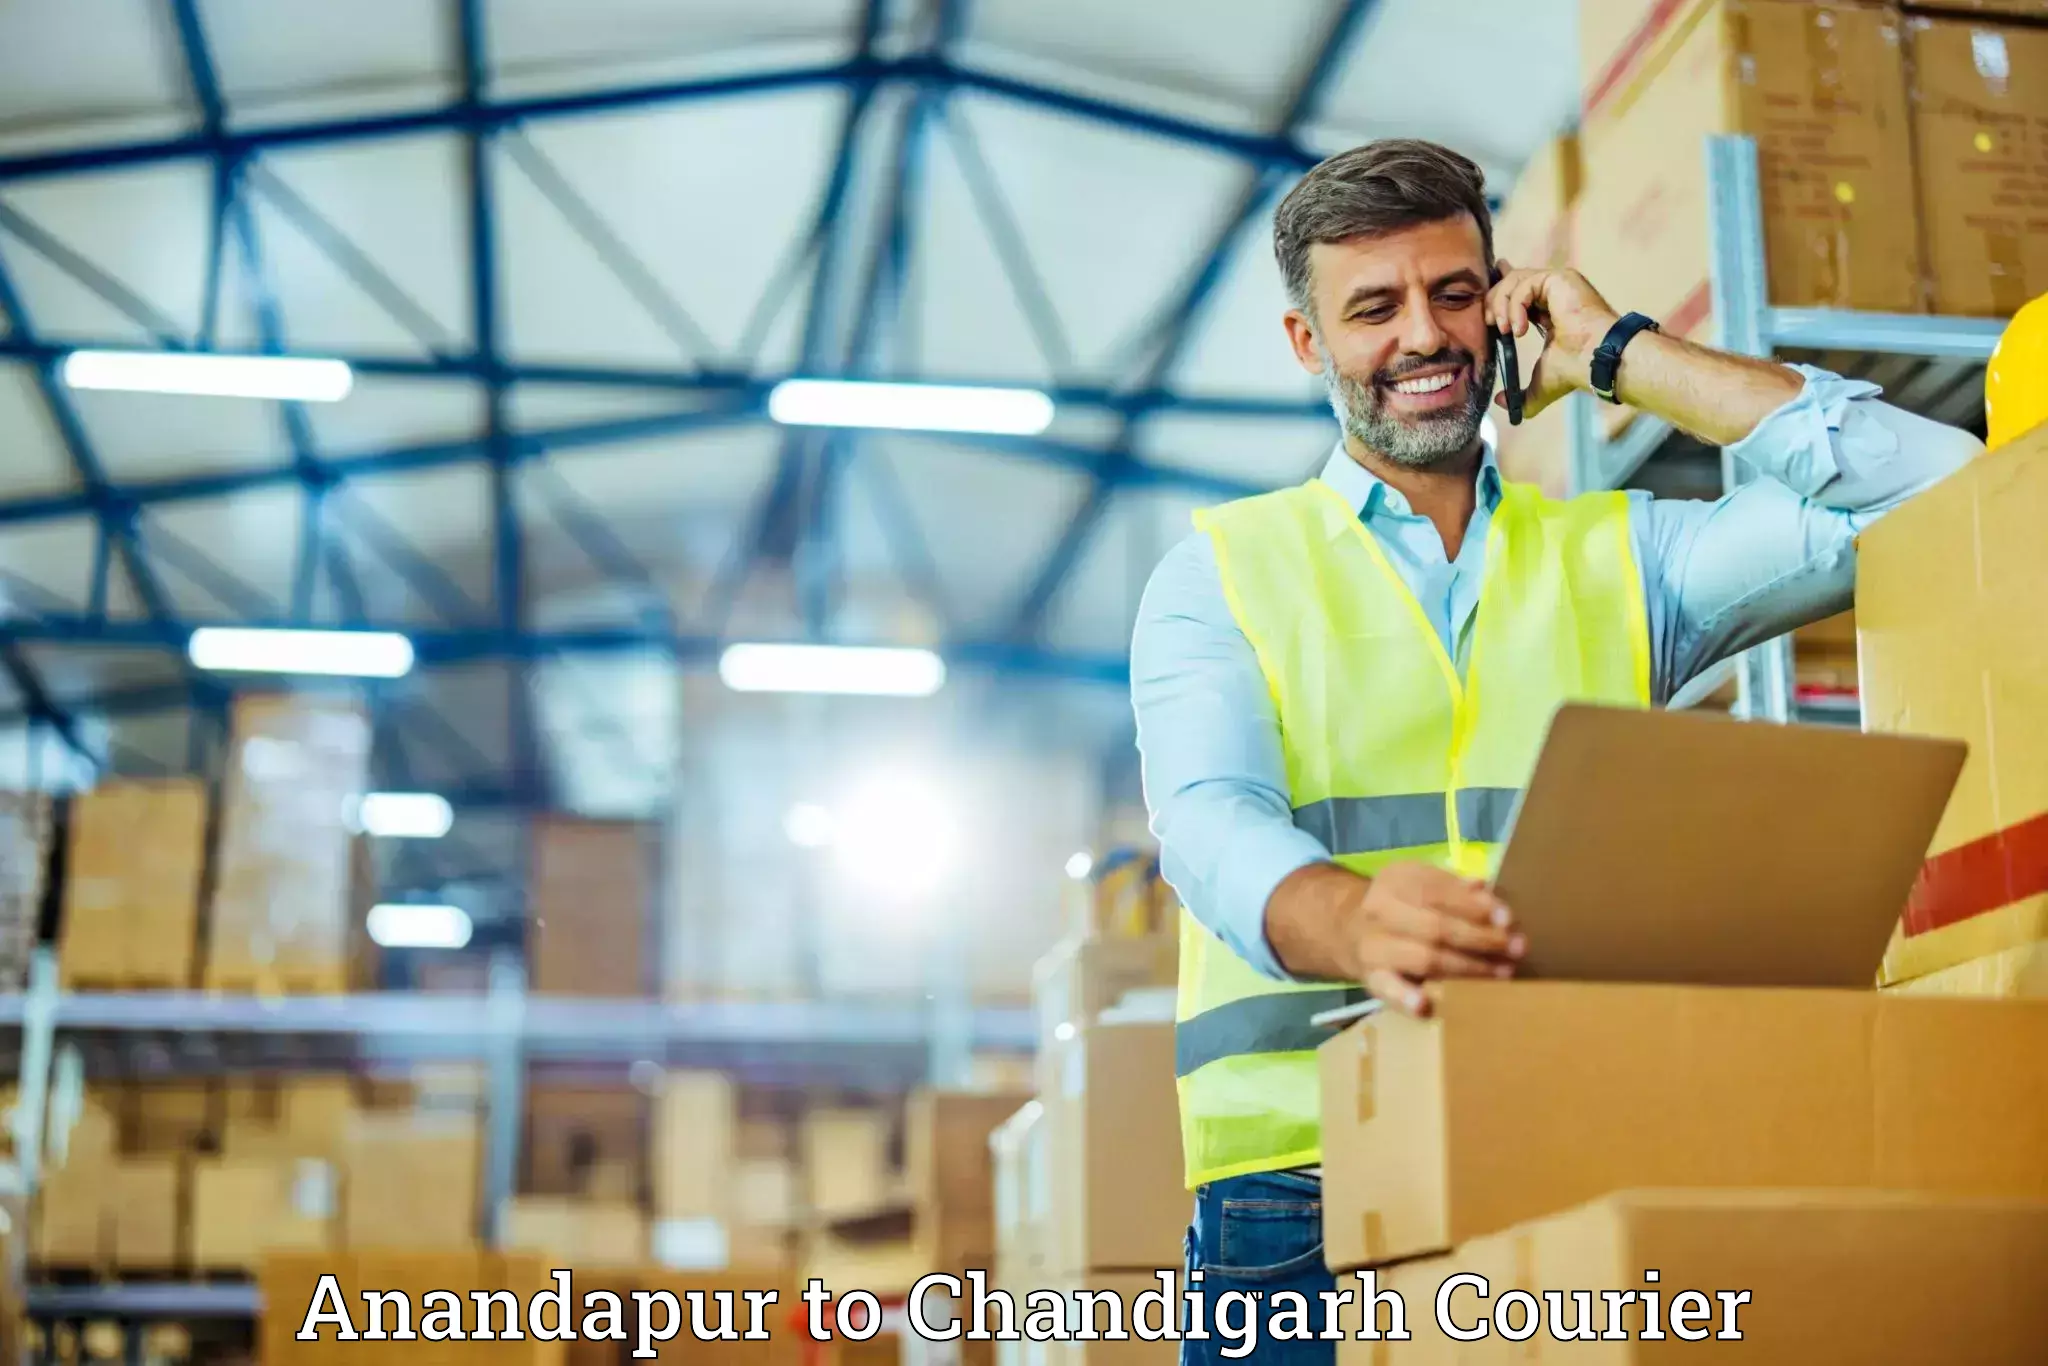 Furniture transport and storage in Anandapur to Chandigarh